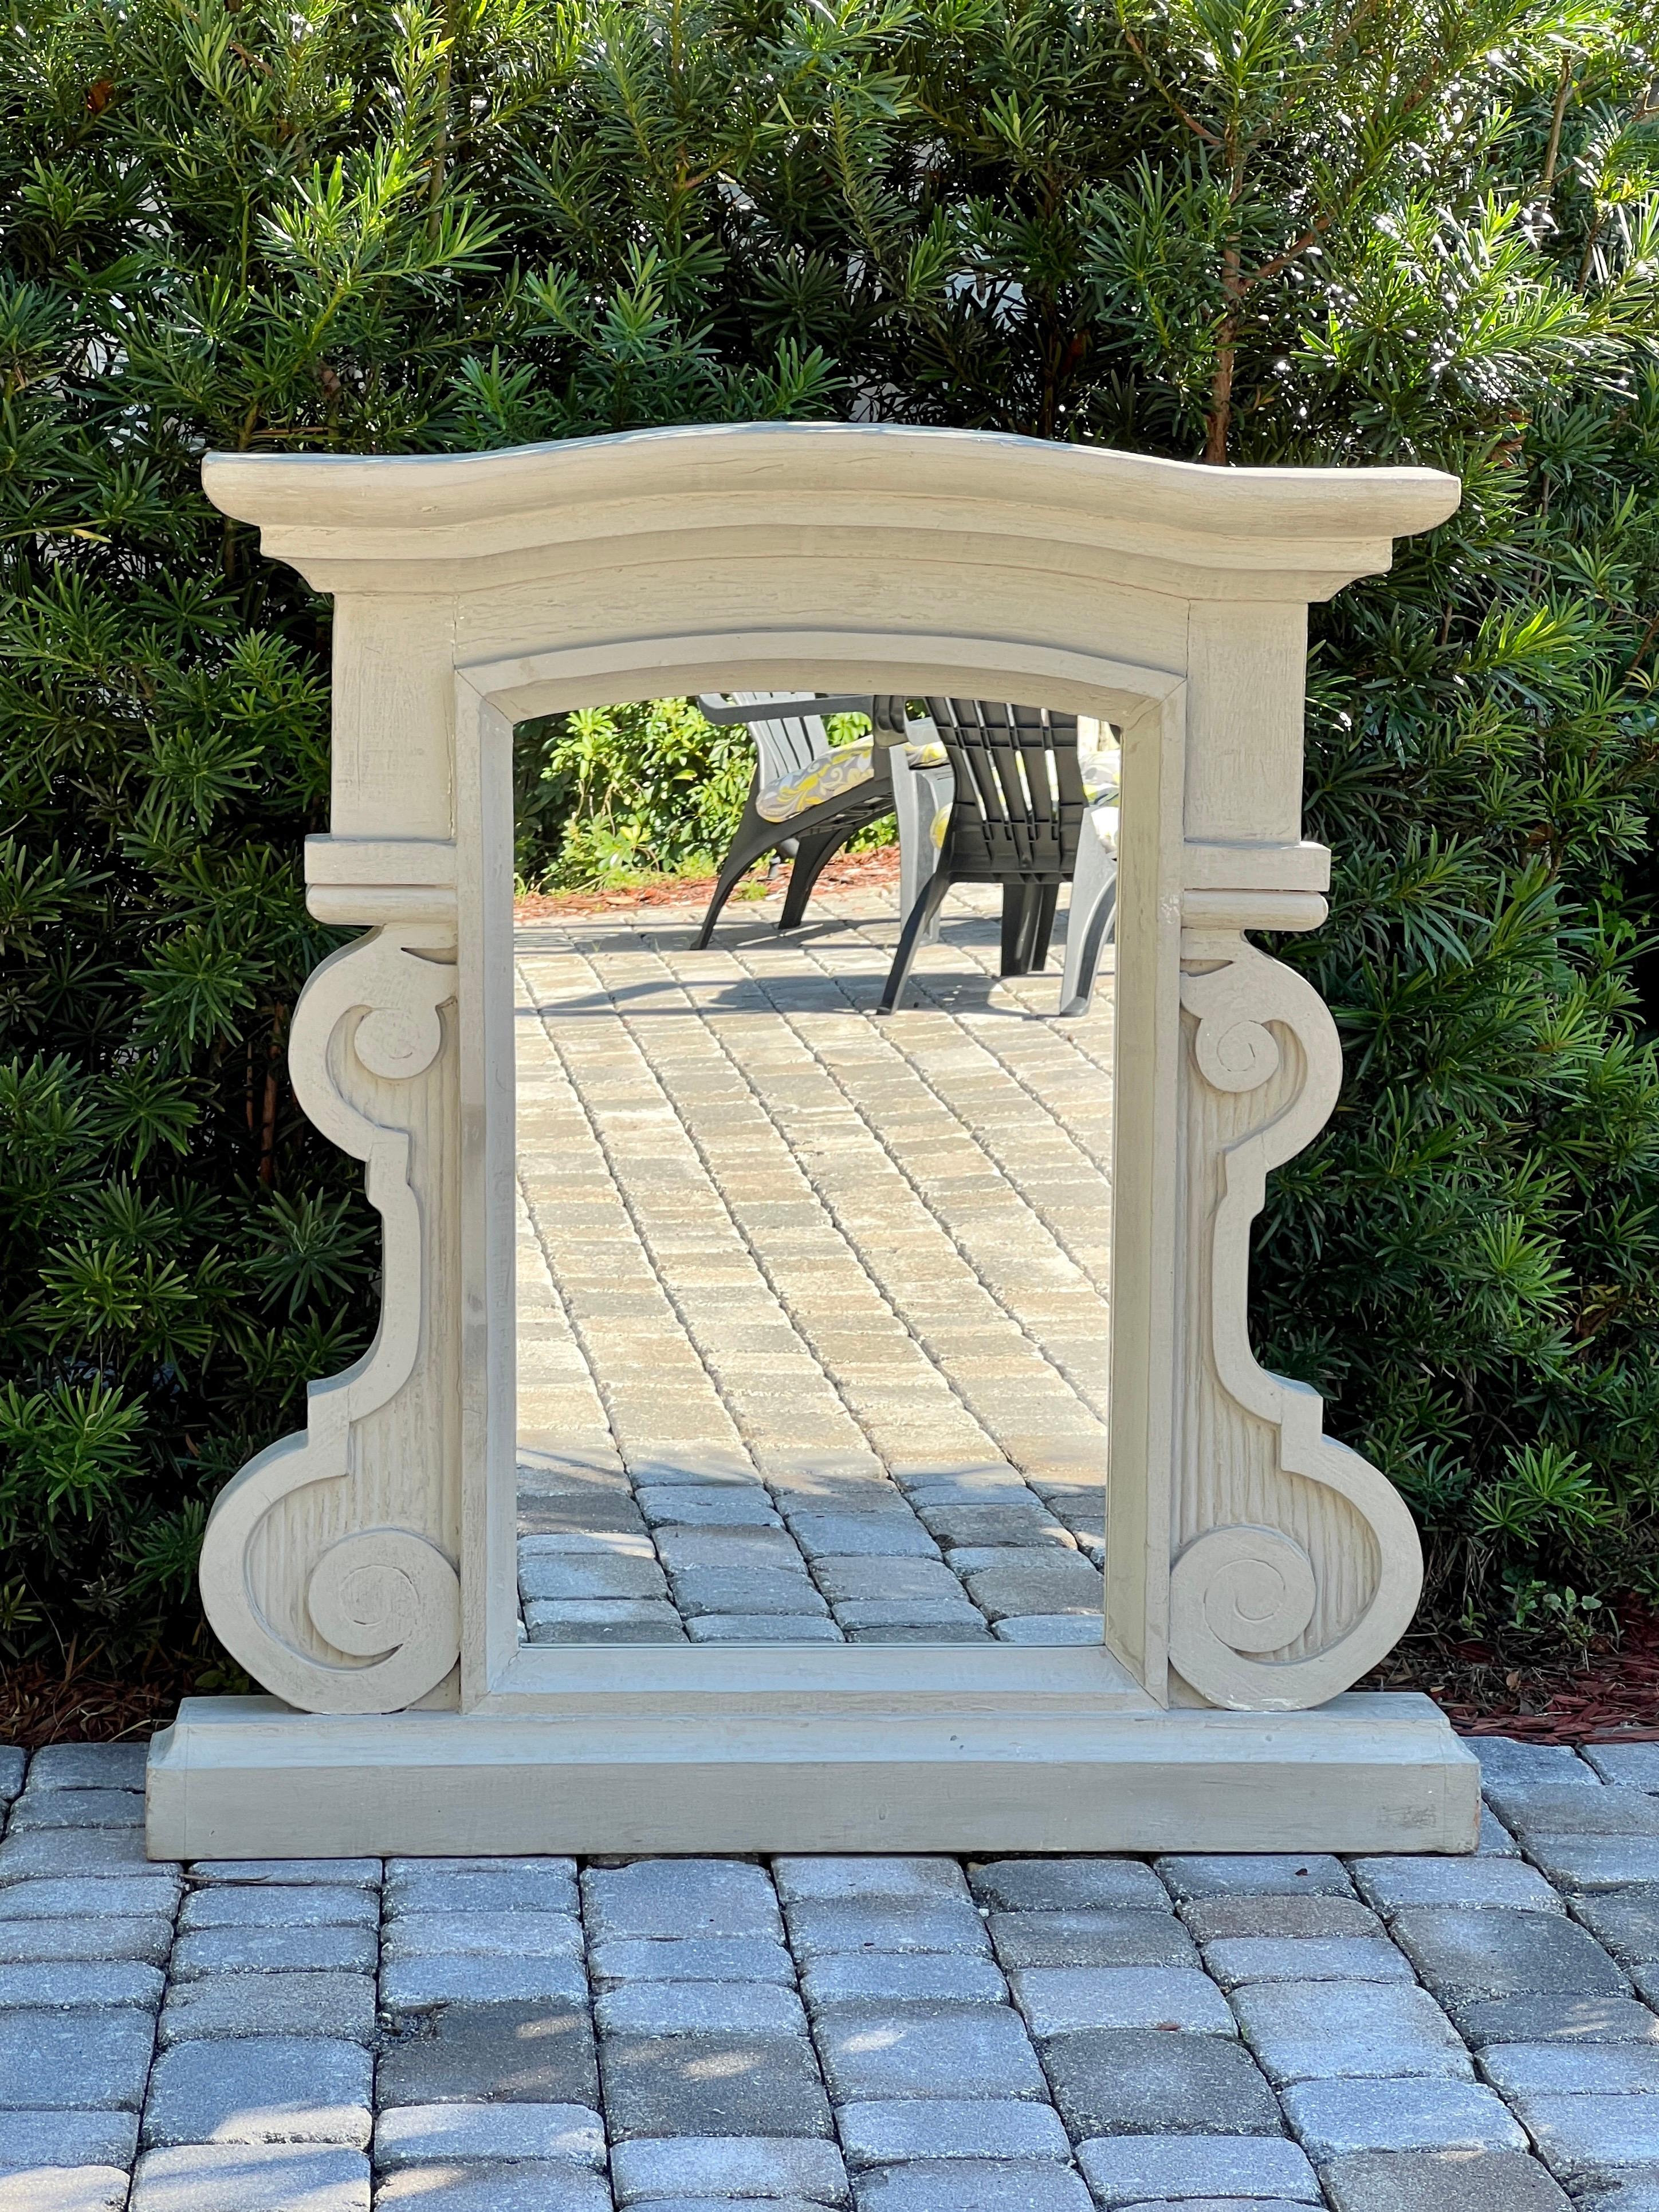 Antique mirror with hand carved dormer window frame in solid wood. The heavyset architectural frame features large chiseled scrolls with fluted details, a curved pediment top, and a sill or ledge base. Hand-painted in a grey whitewash paint with a